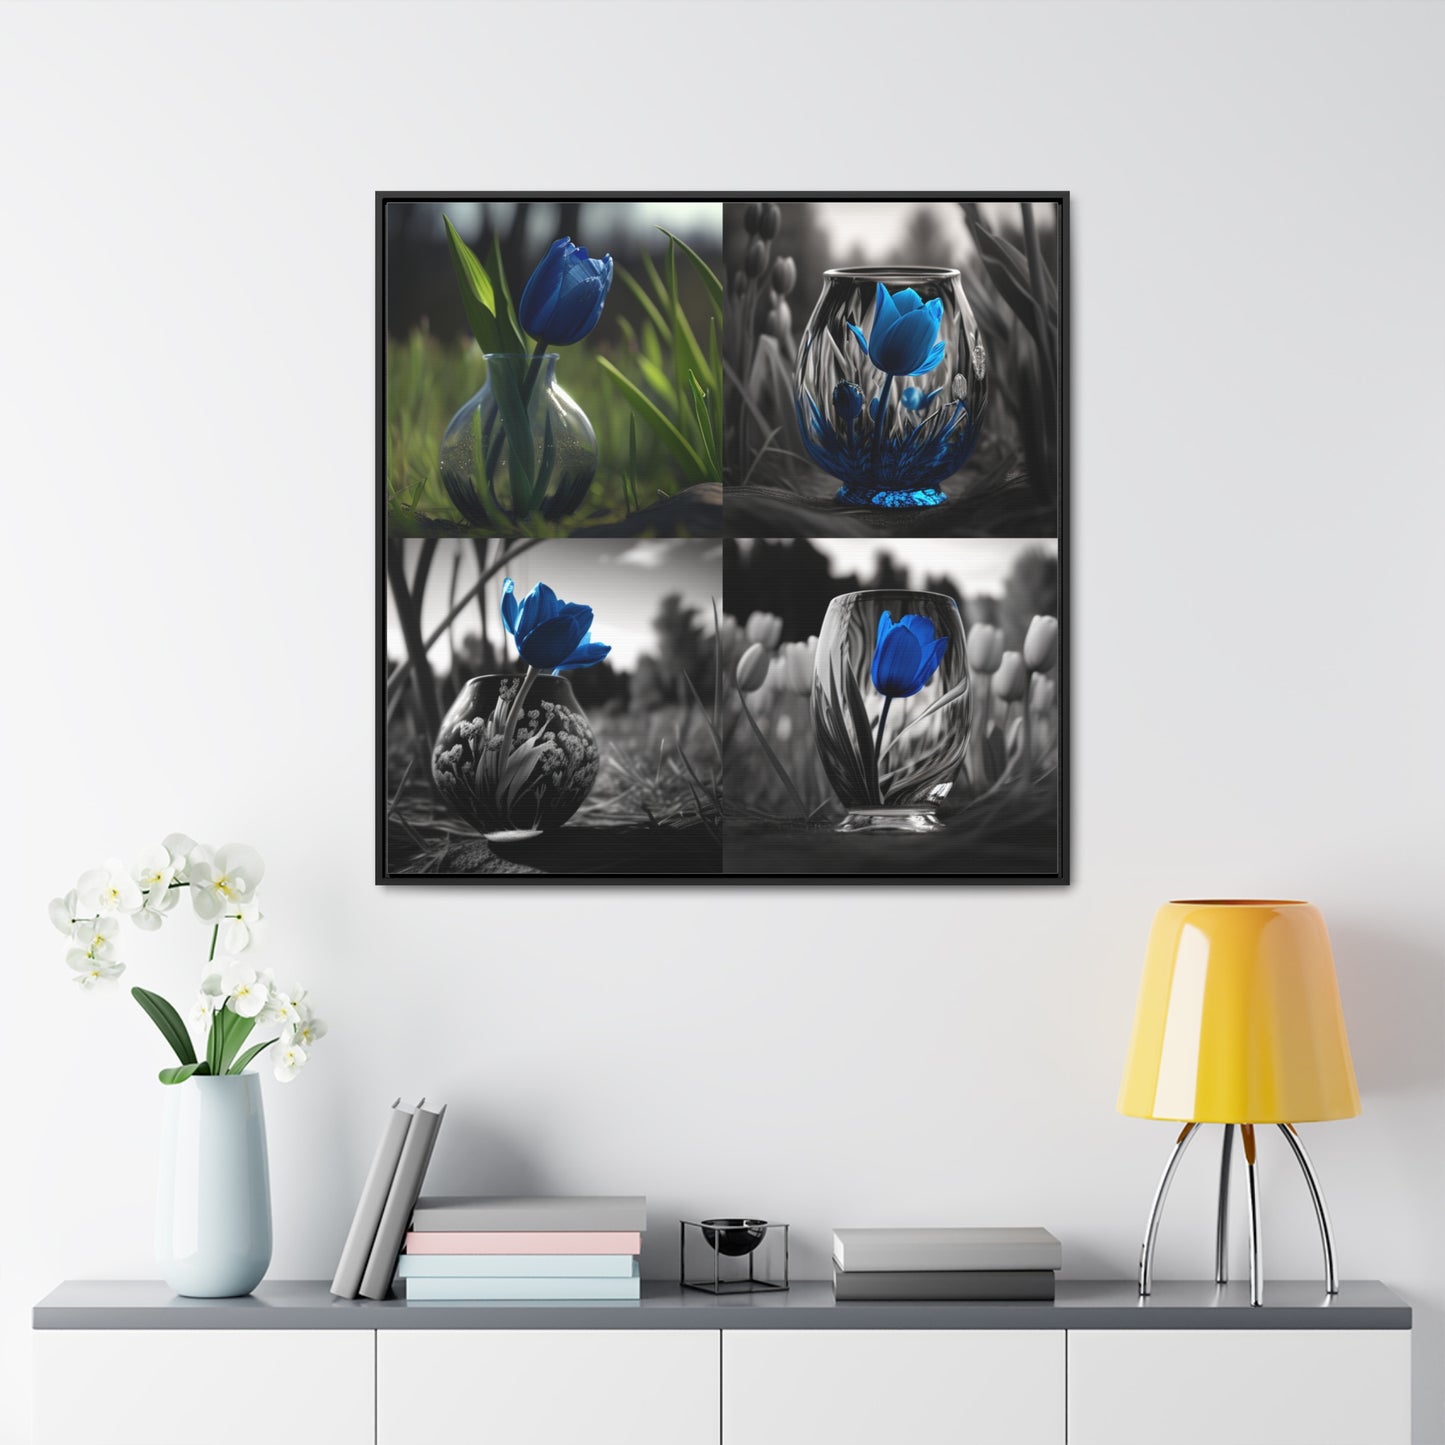 Gallery Canvas Wraps, Square Frame Tulip 5